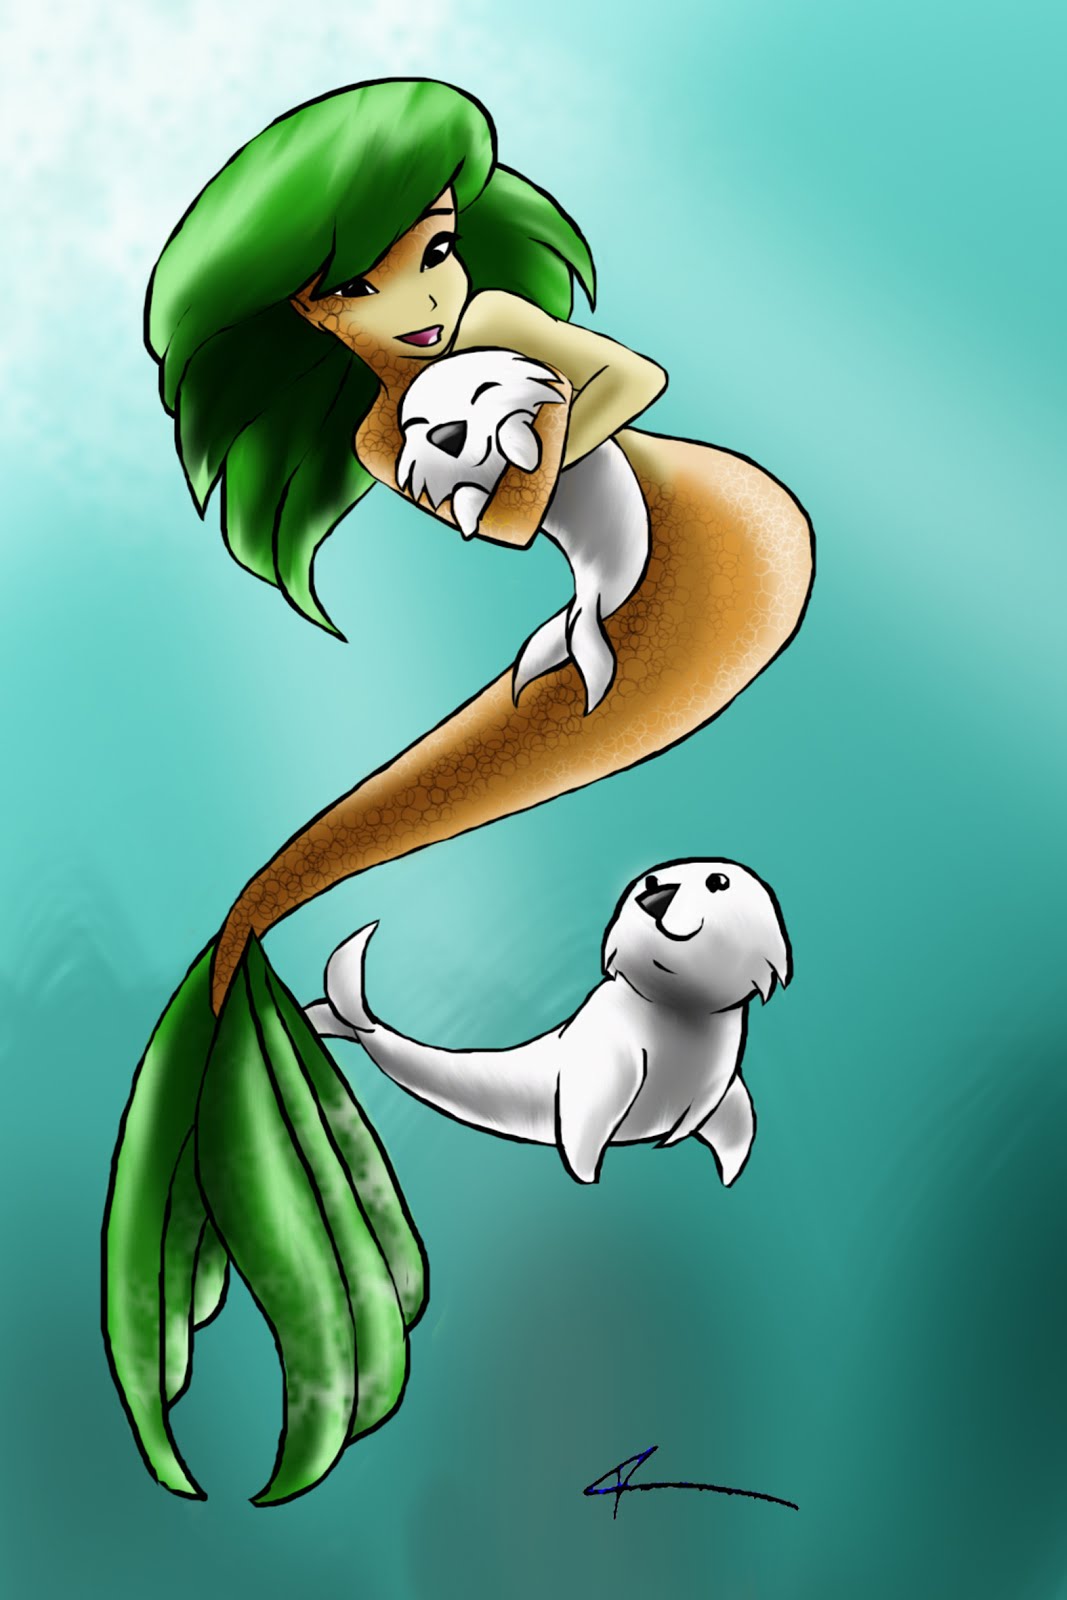 "Mermaid with Seals"